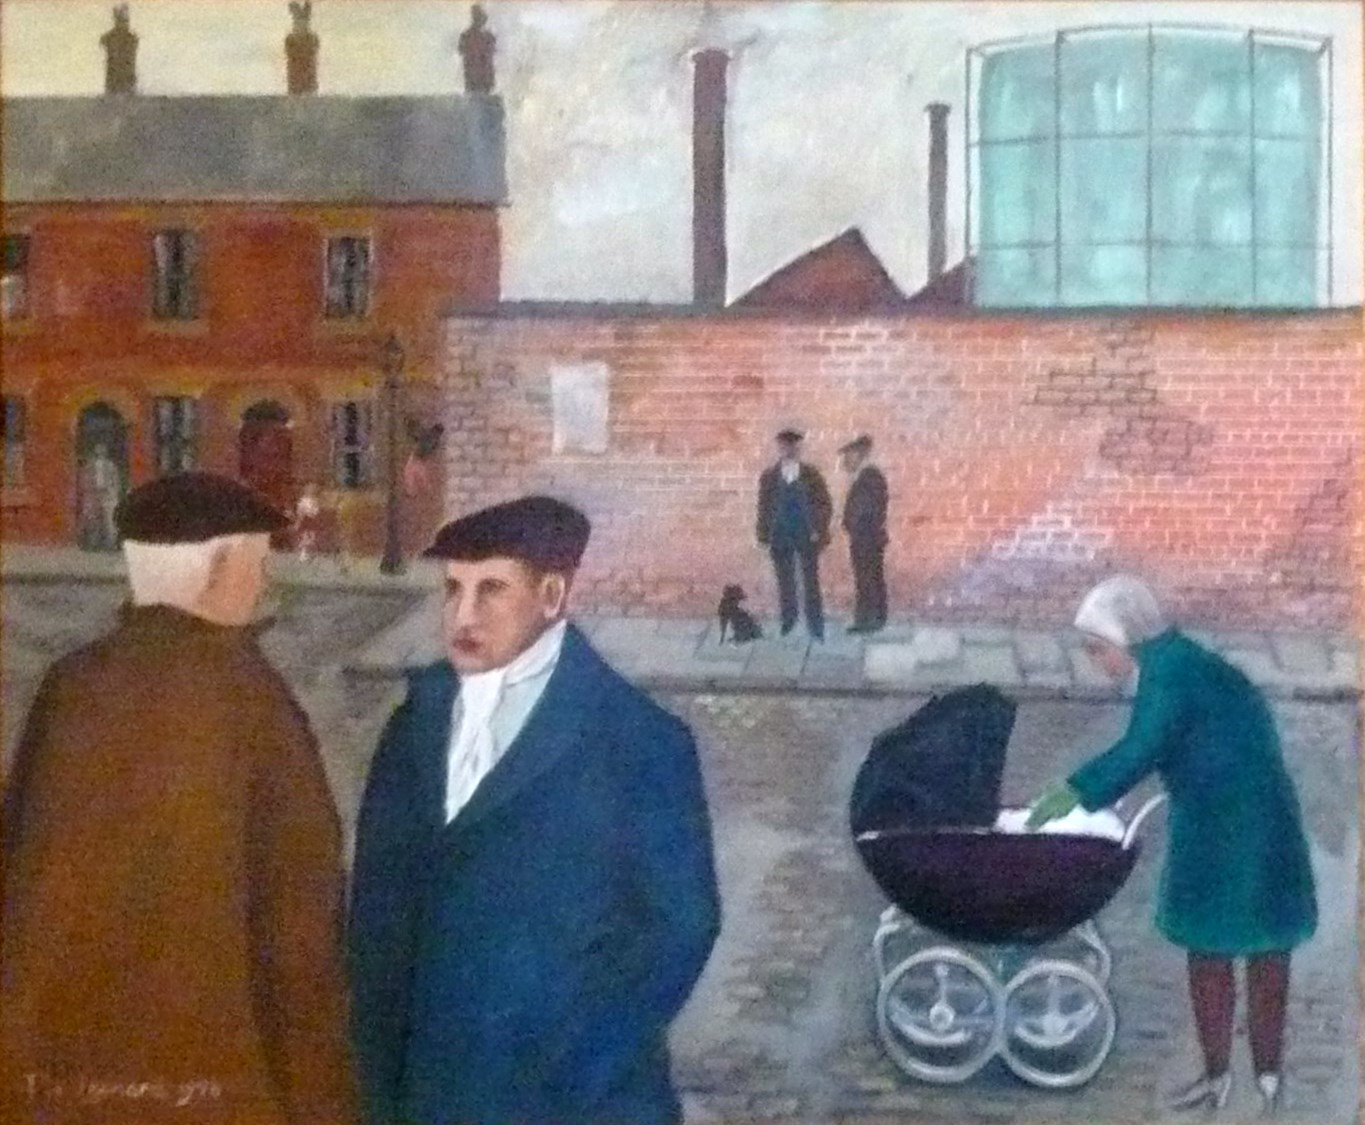 A Street scene in a Northern Town